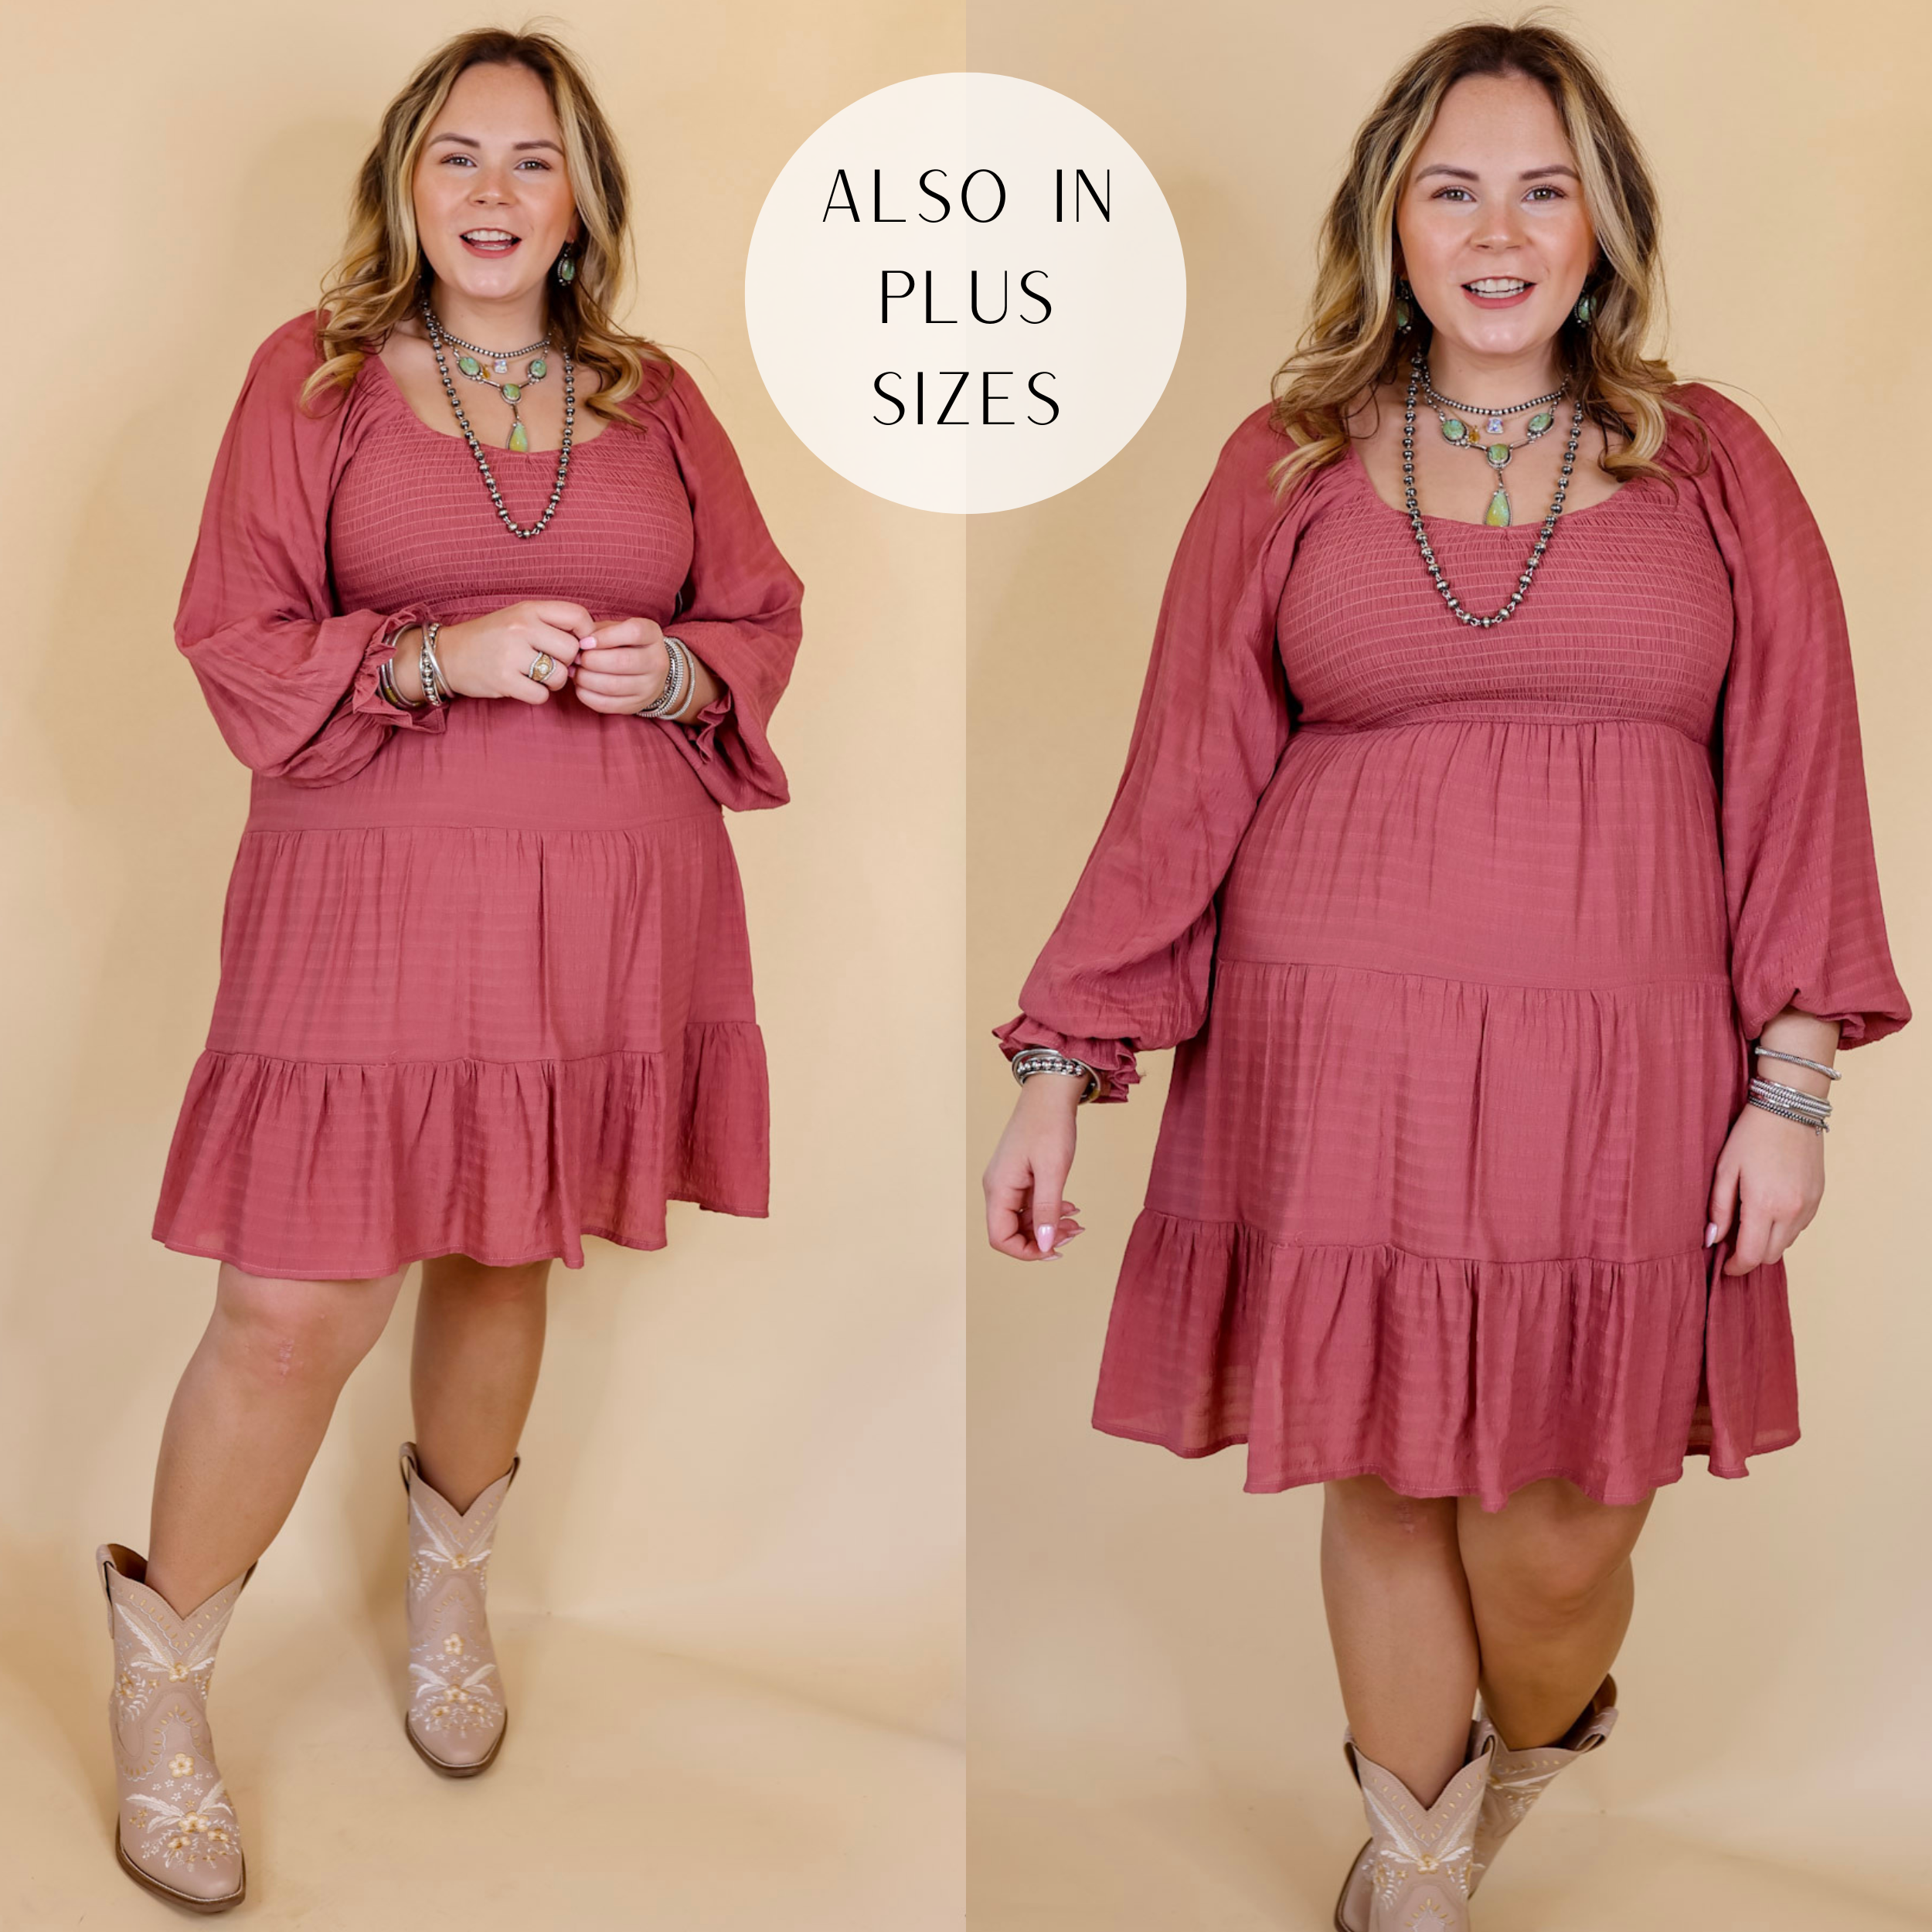 Model is wearing a long sleeve floral dress with a smocked bodice in mauve. Model has this dress paired with tall, white boots and Navajo jewelry. Background is solid tan.